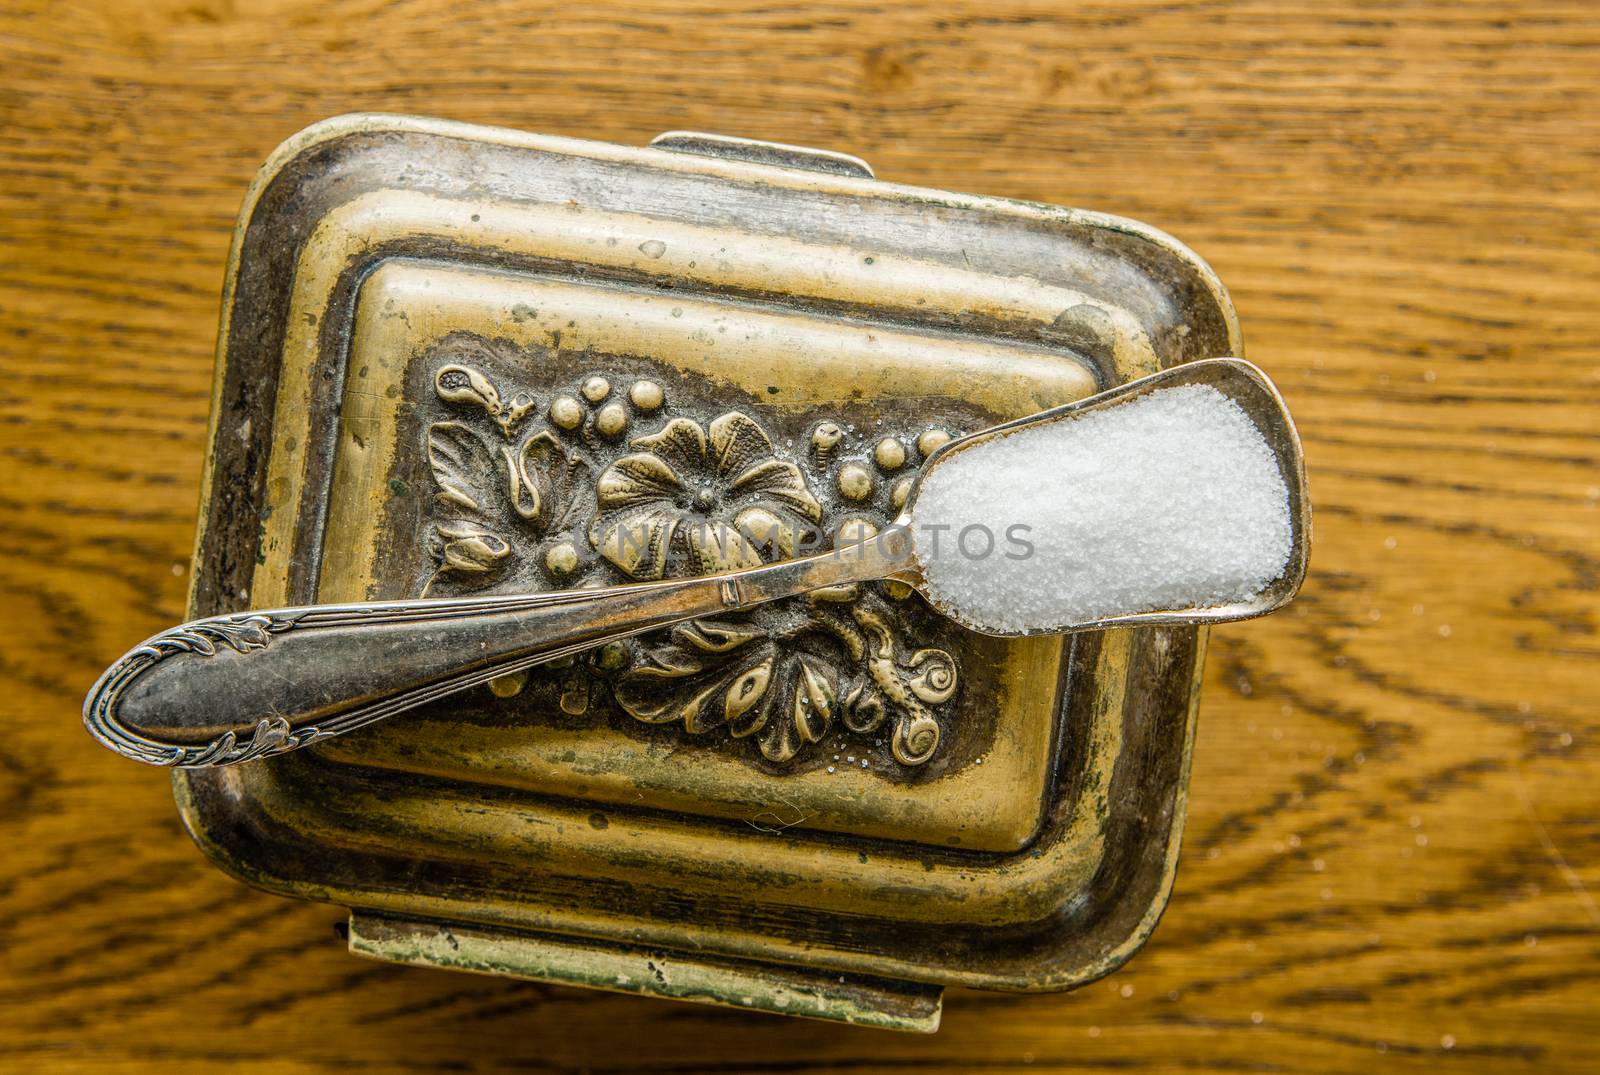 Sugar bowl in the form of a bronze box and a square spoon with sugar